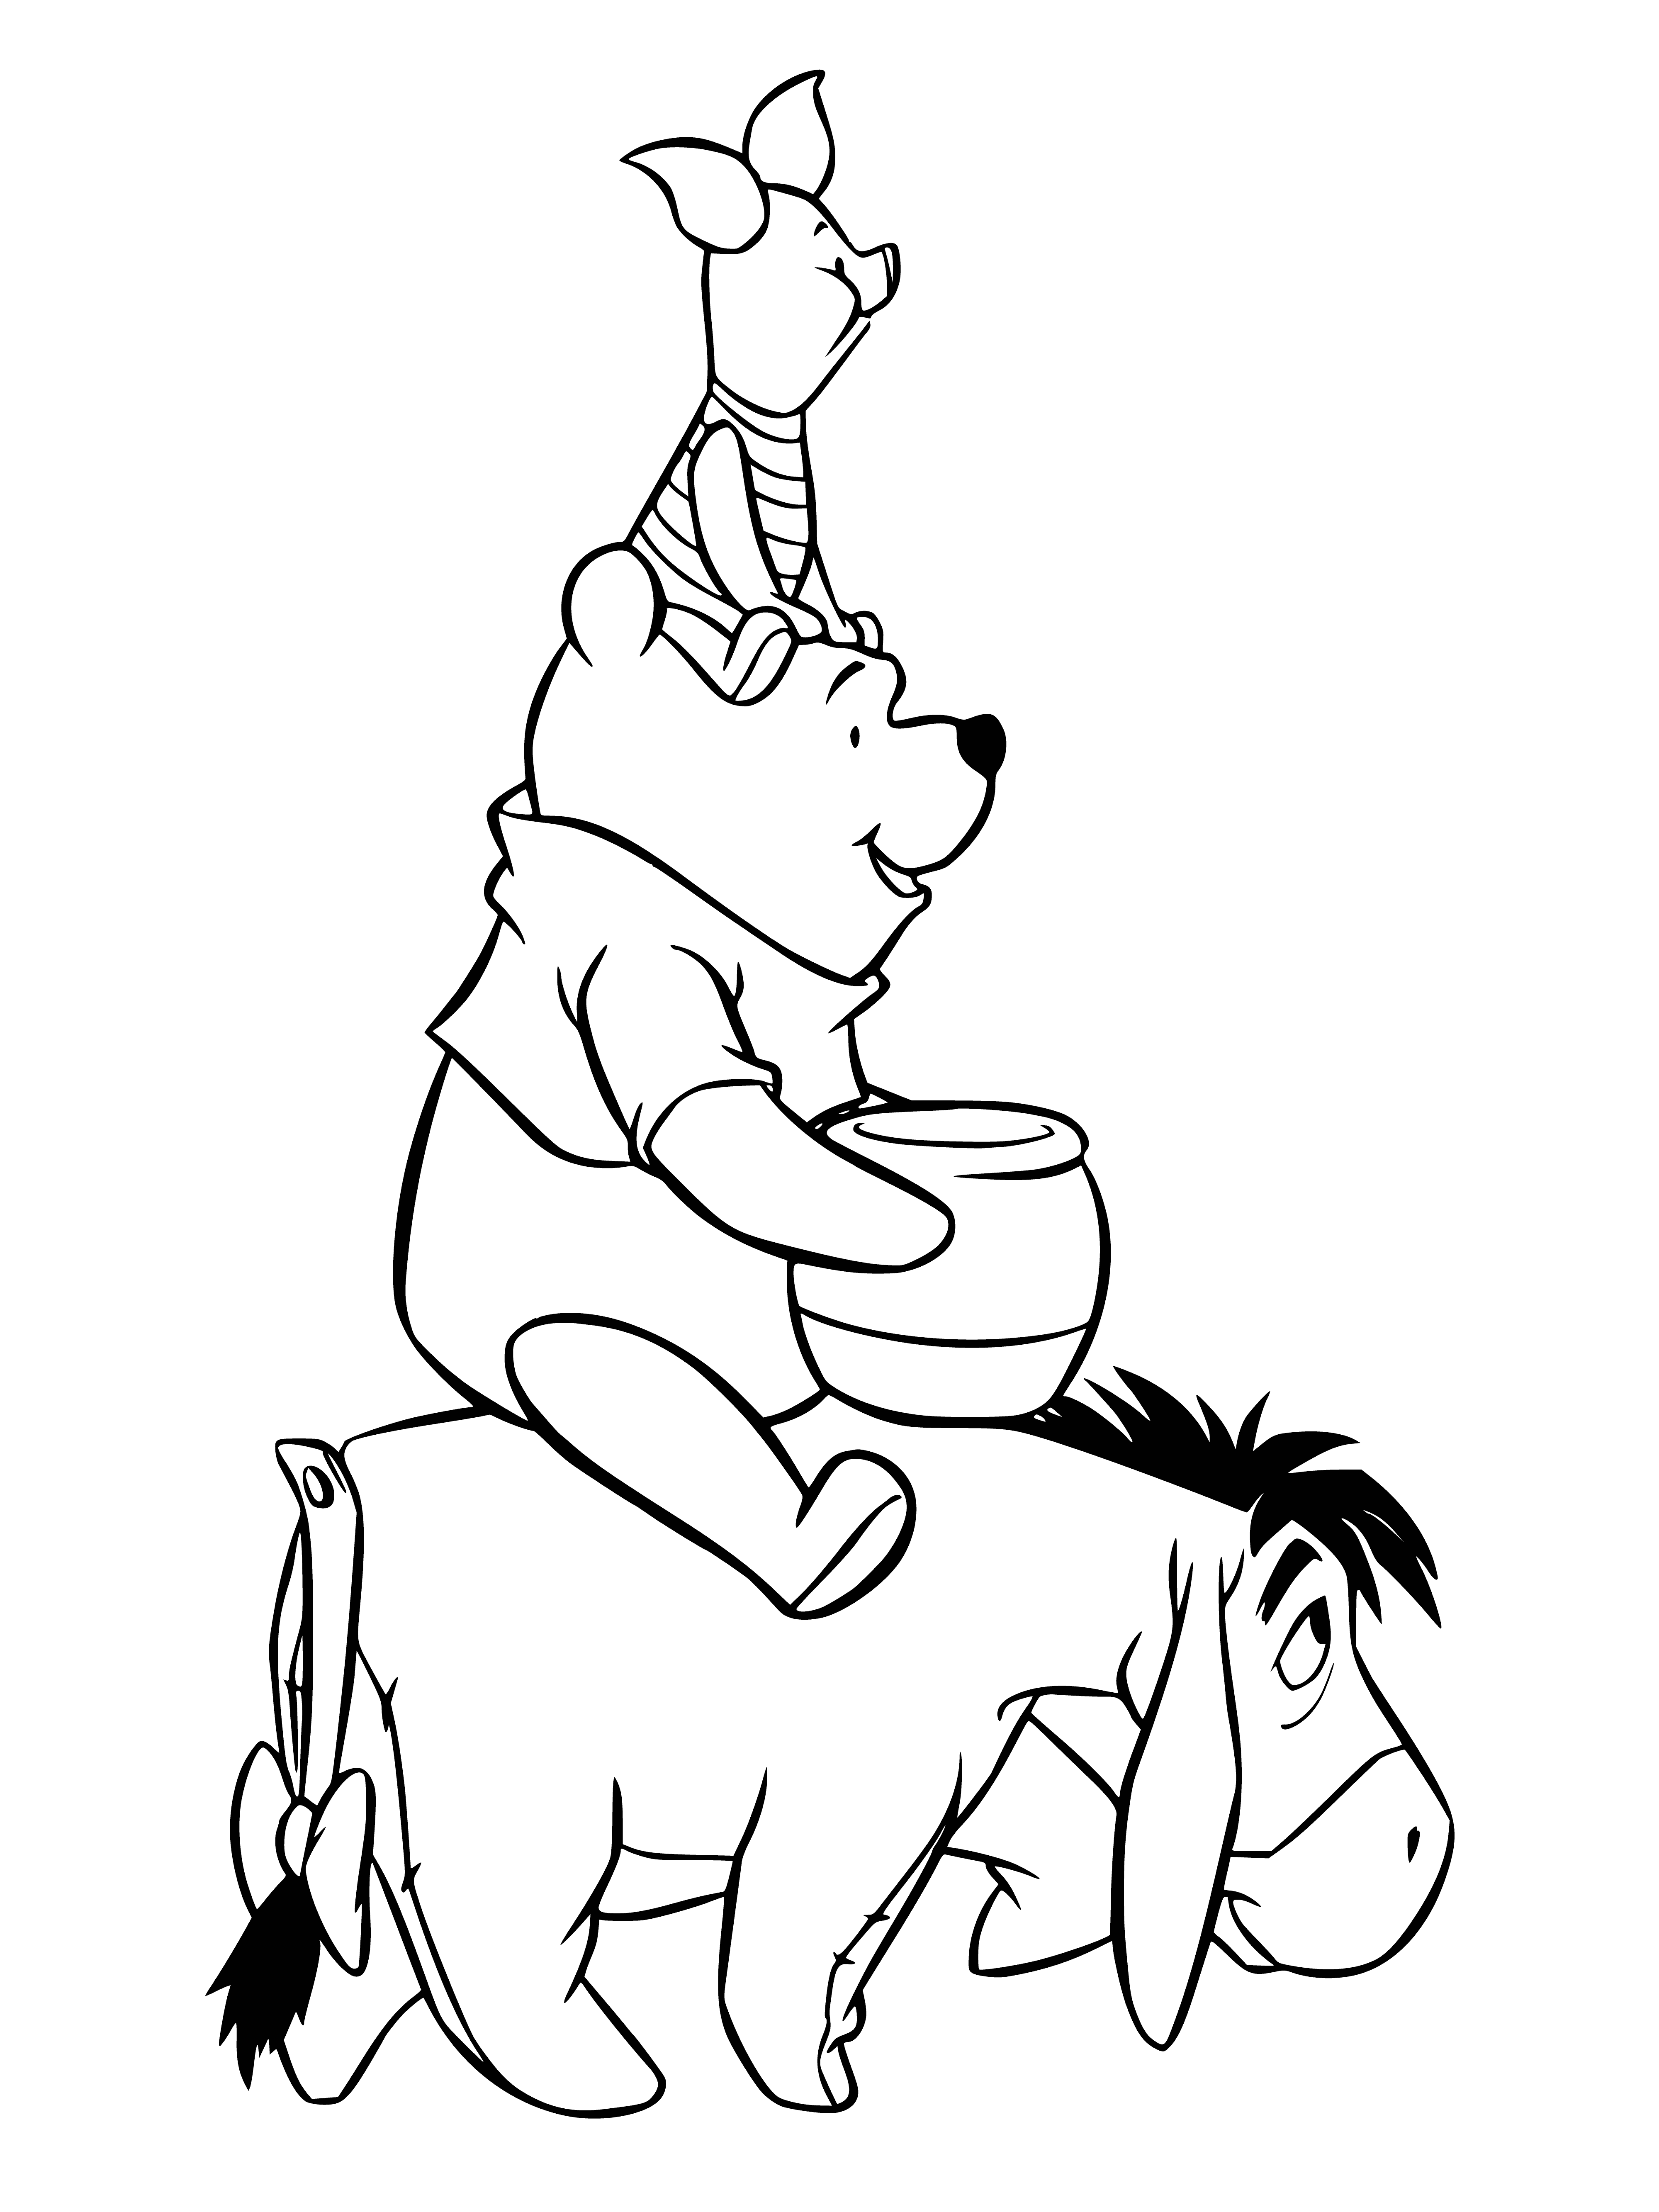 On horseback coloring page